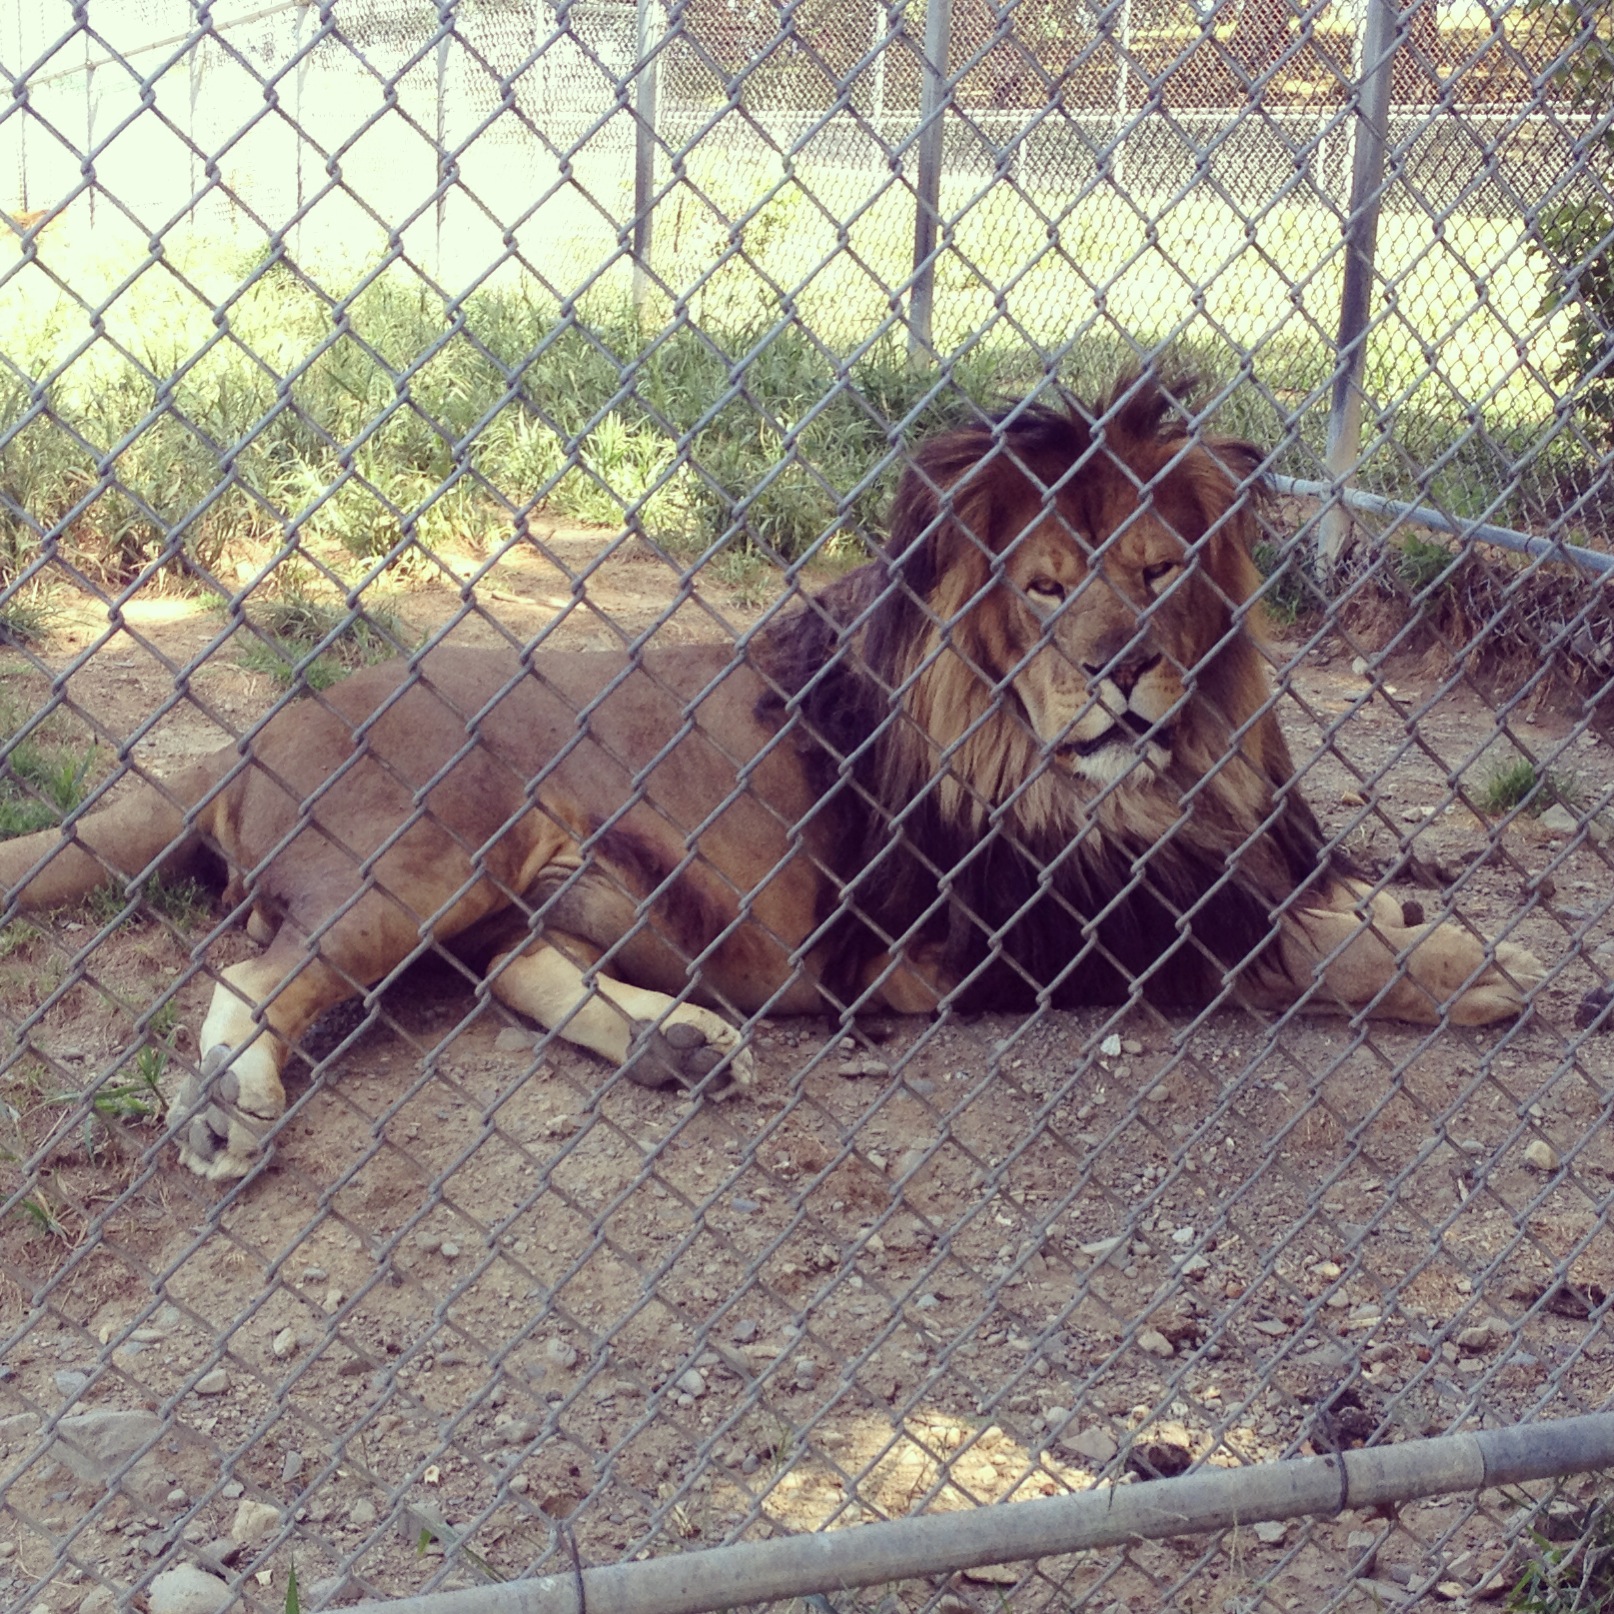 Visiting a zoo with a lion, like Space Farms Zoo, is a great way to get excited for Disney!